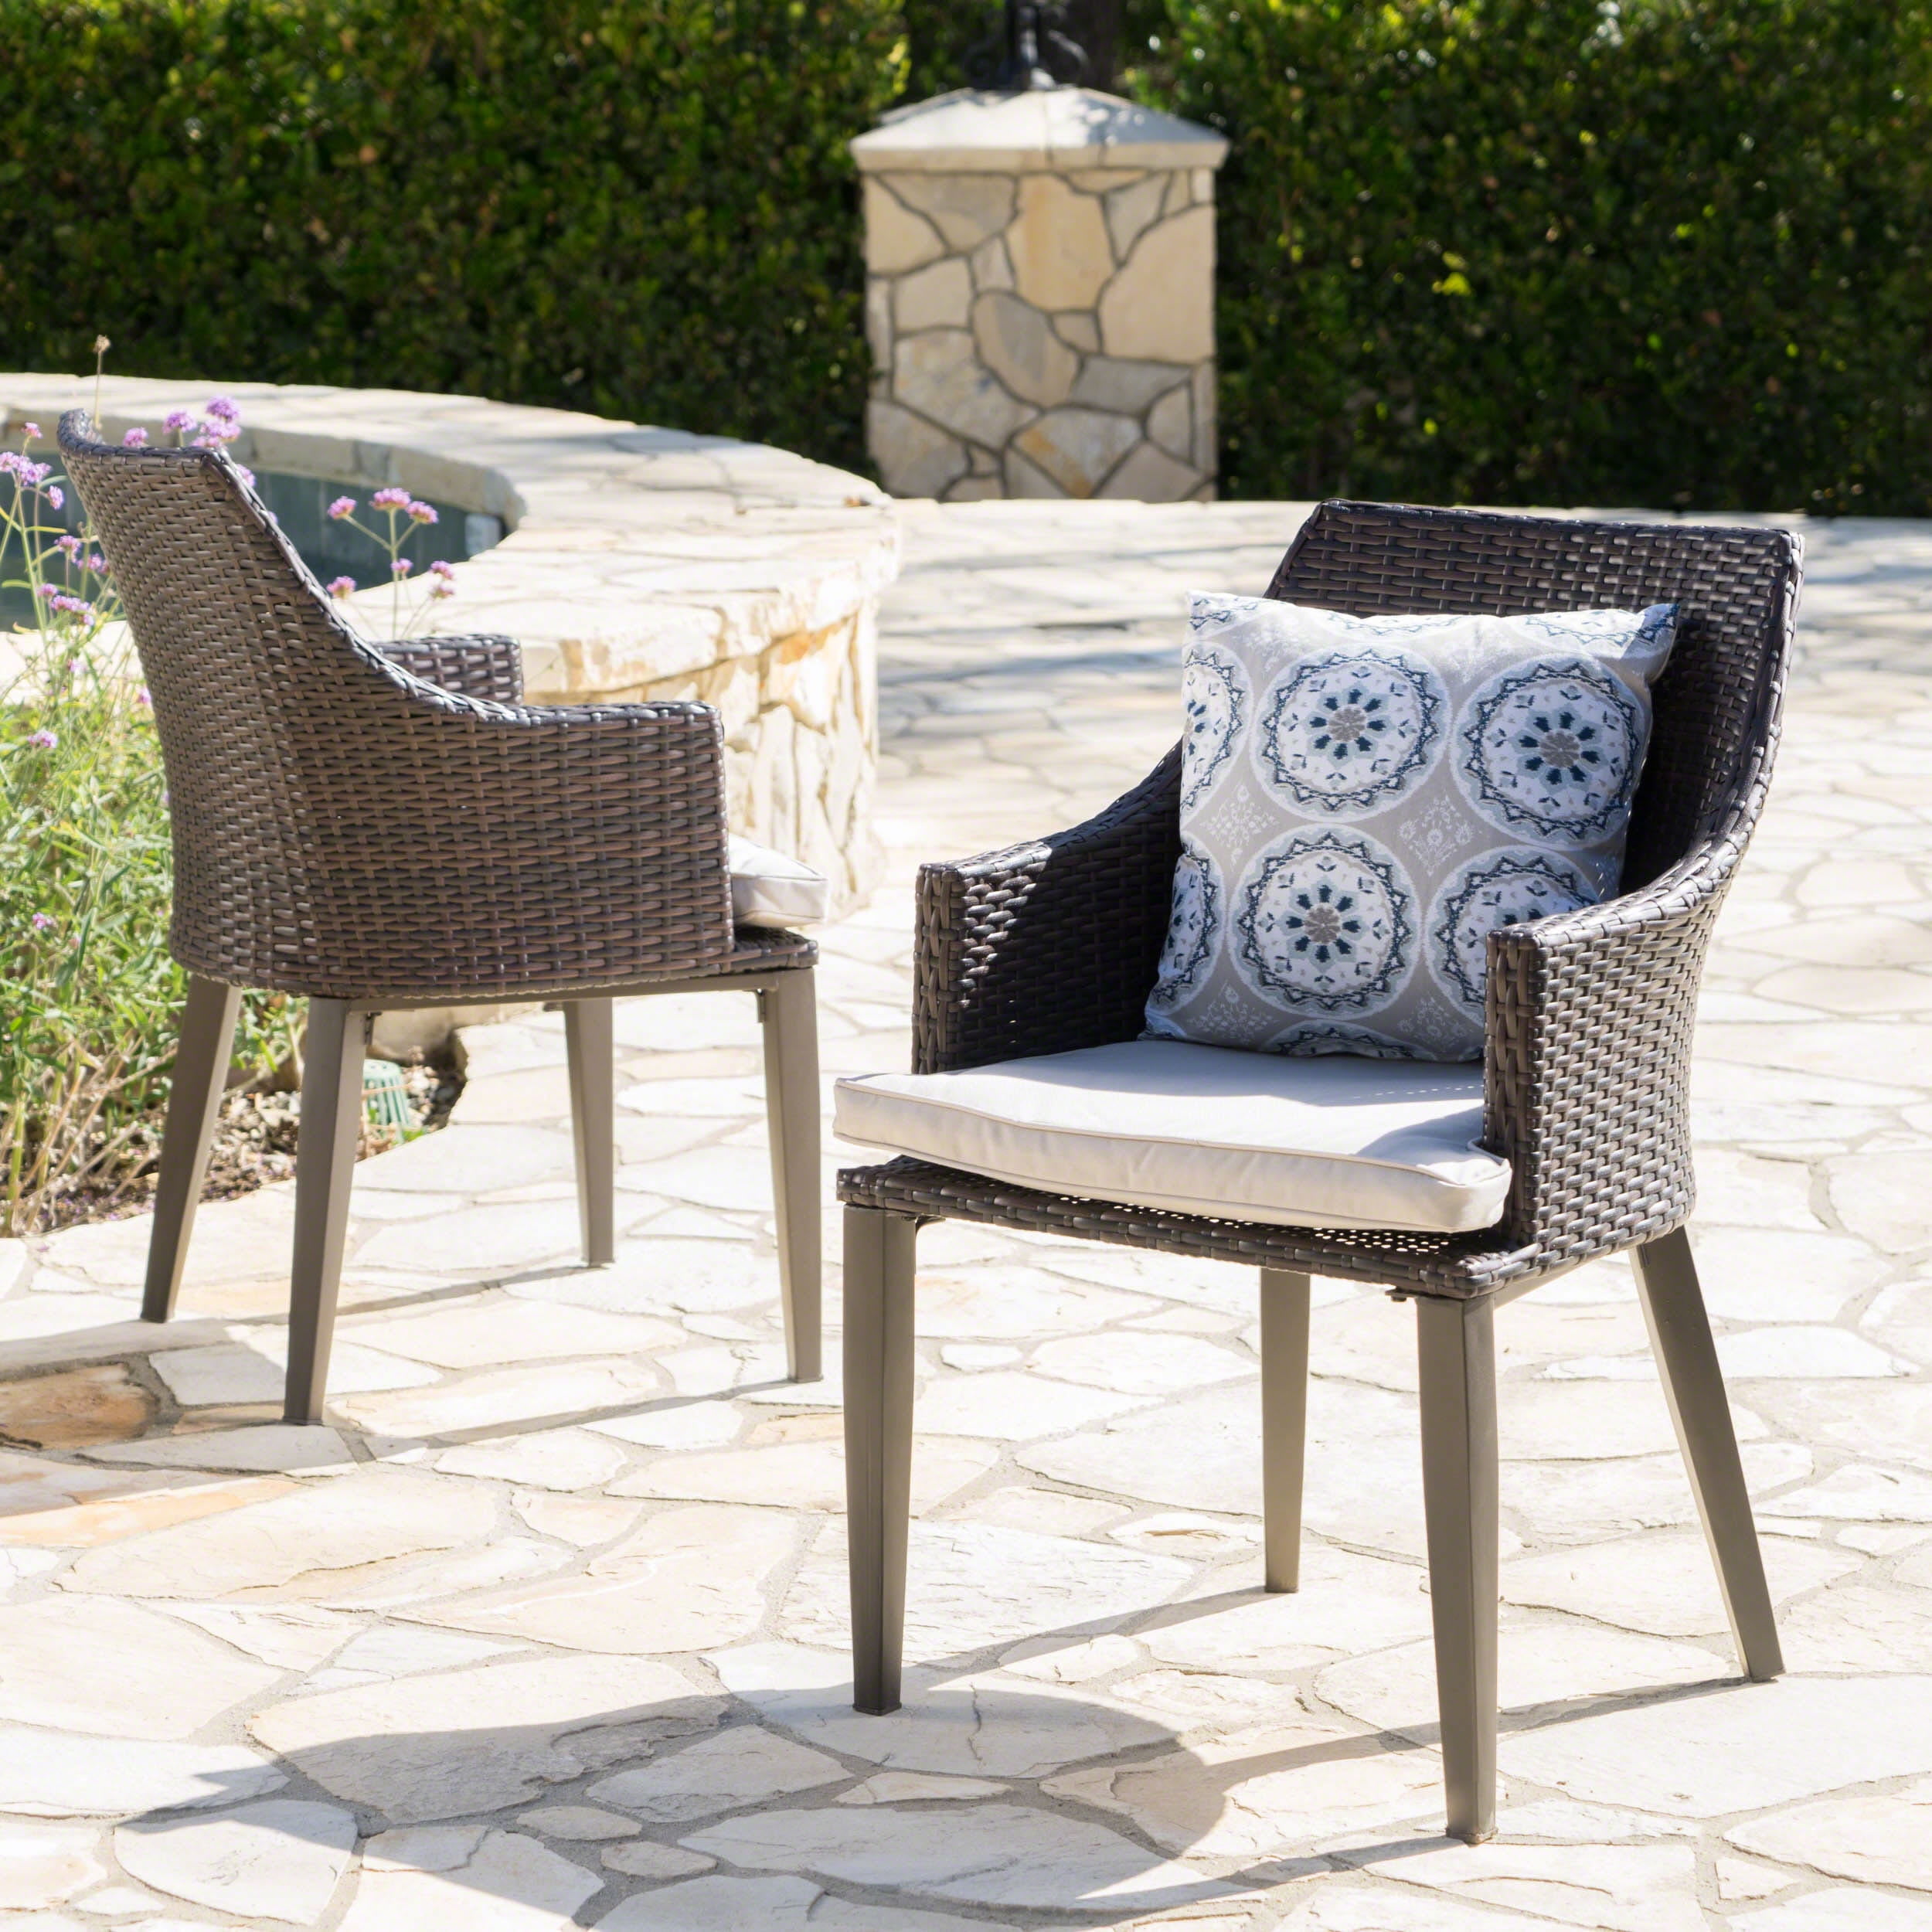 Hillsdale Outdoor Wicker Dining Chairs with Cushions, Set of 2